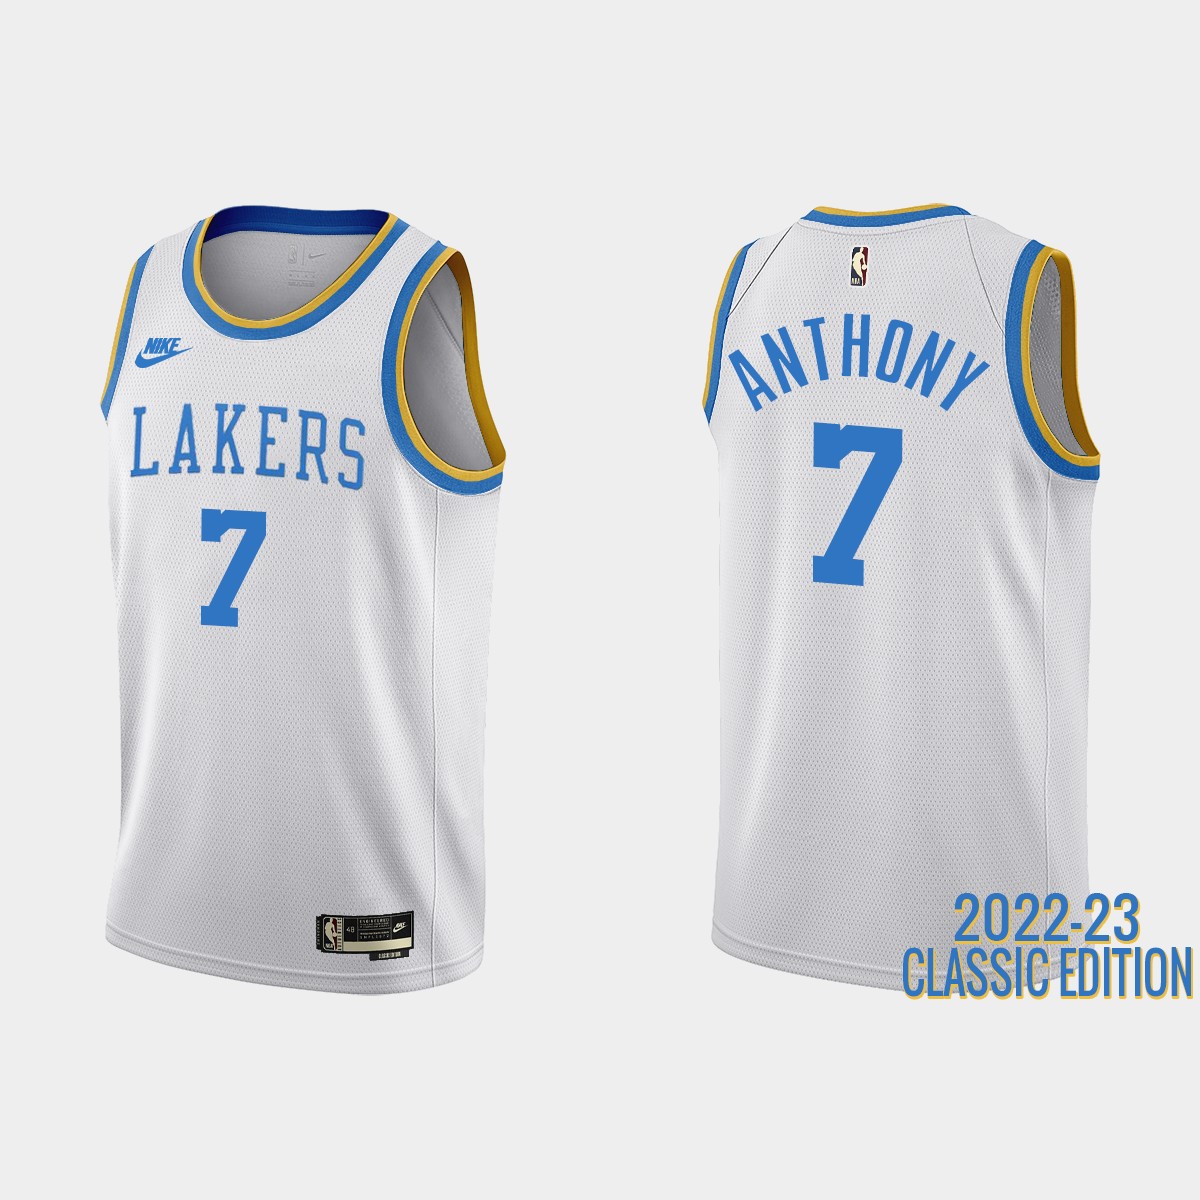 Carmelo Anthony #7 Los Angeles Lakers 2022-23 Classic Edition White Jersey